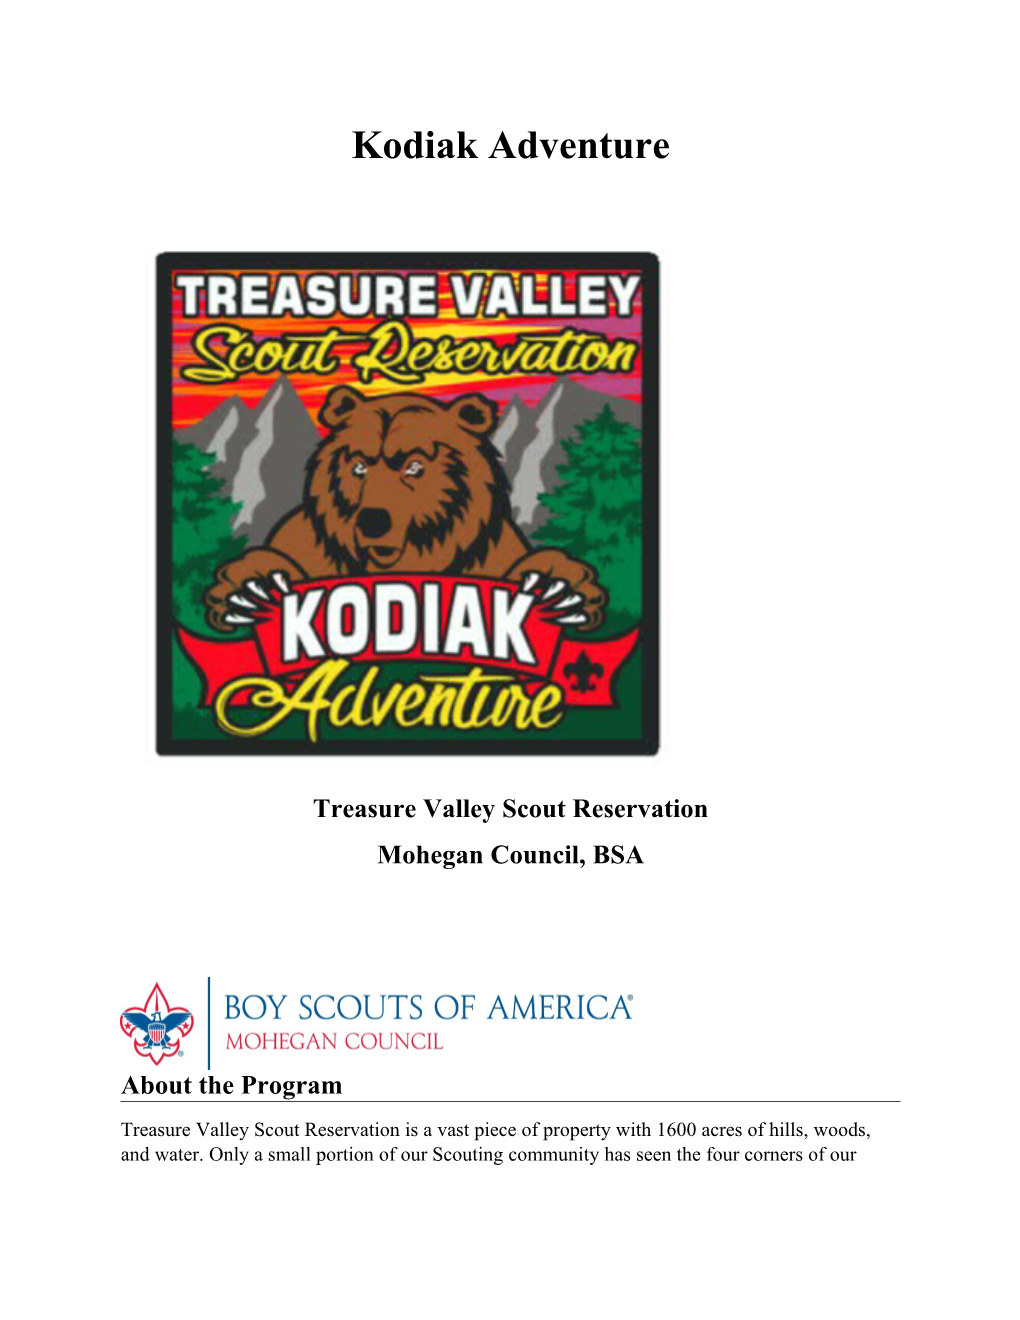 Treasure Valley Scout Reservation